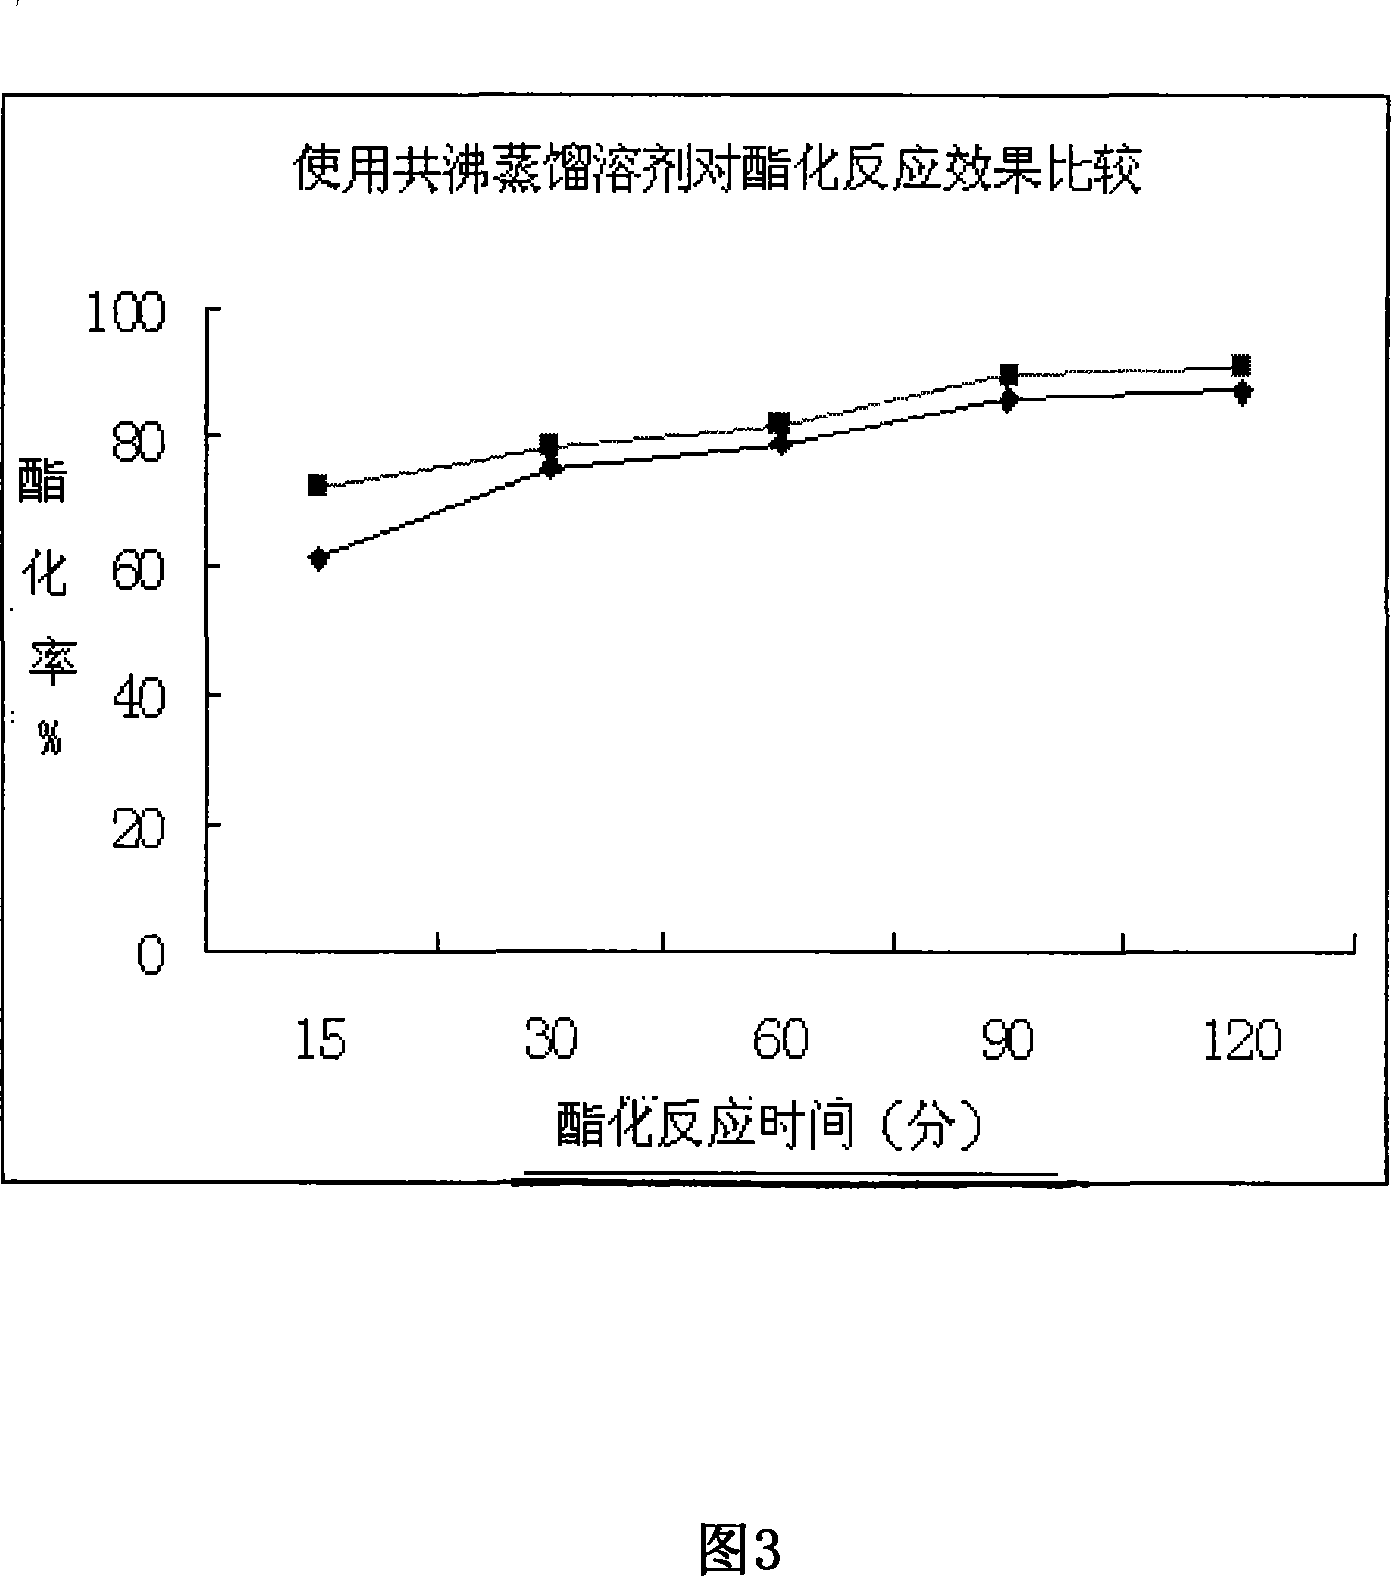 Method for producing low freezing point biodiesel by employing waste animal and vegetable oil coupling and special device